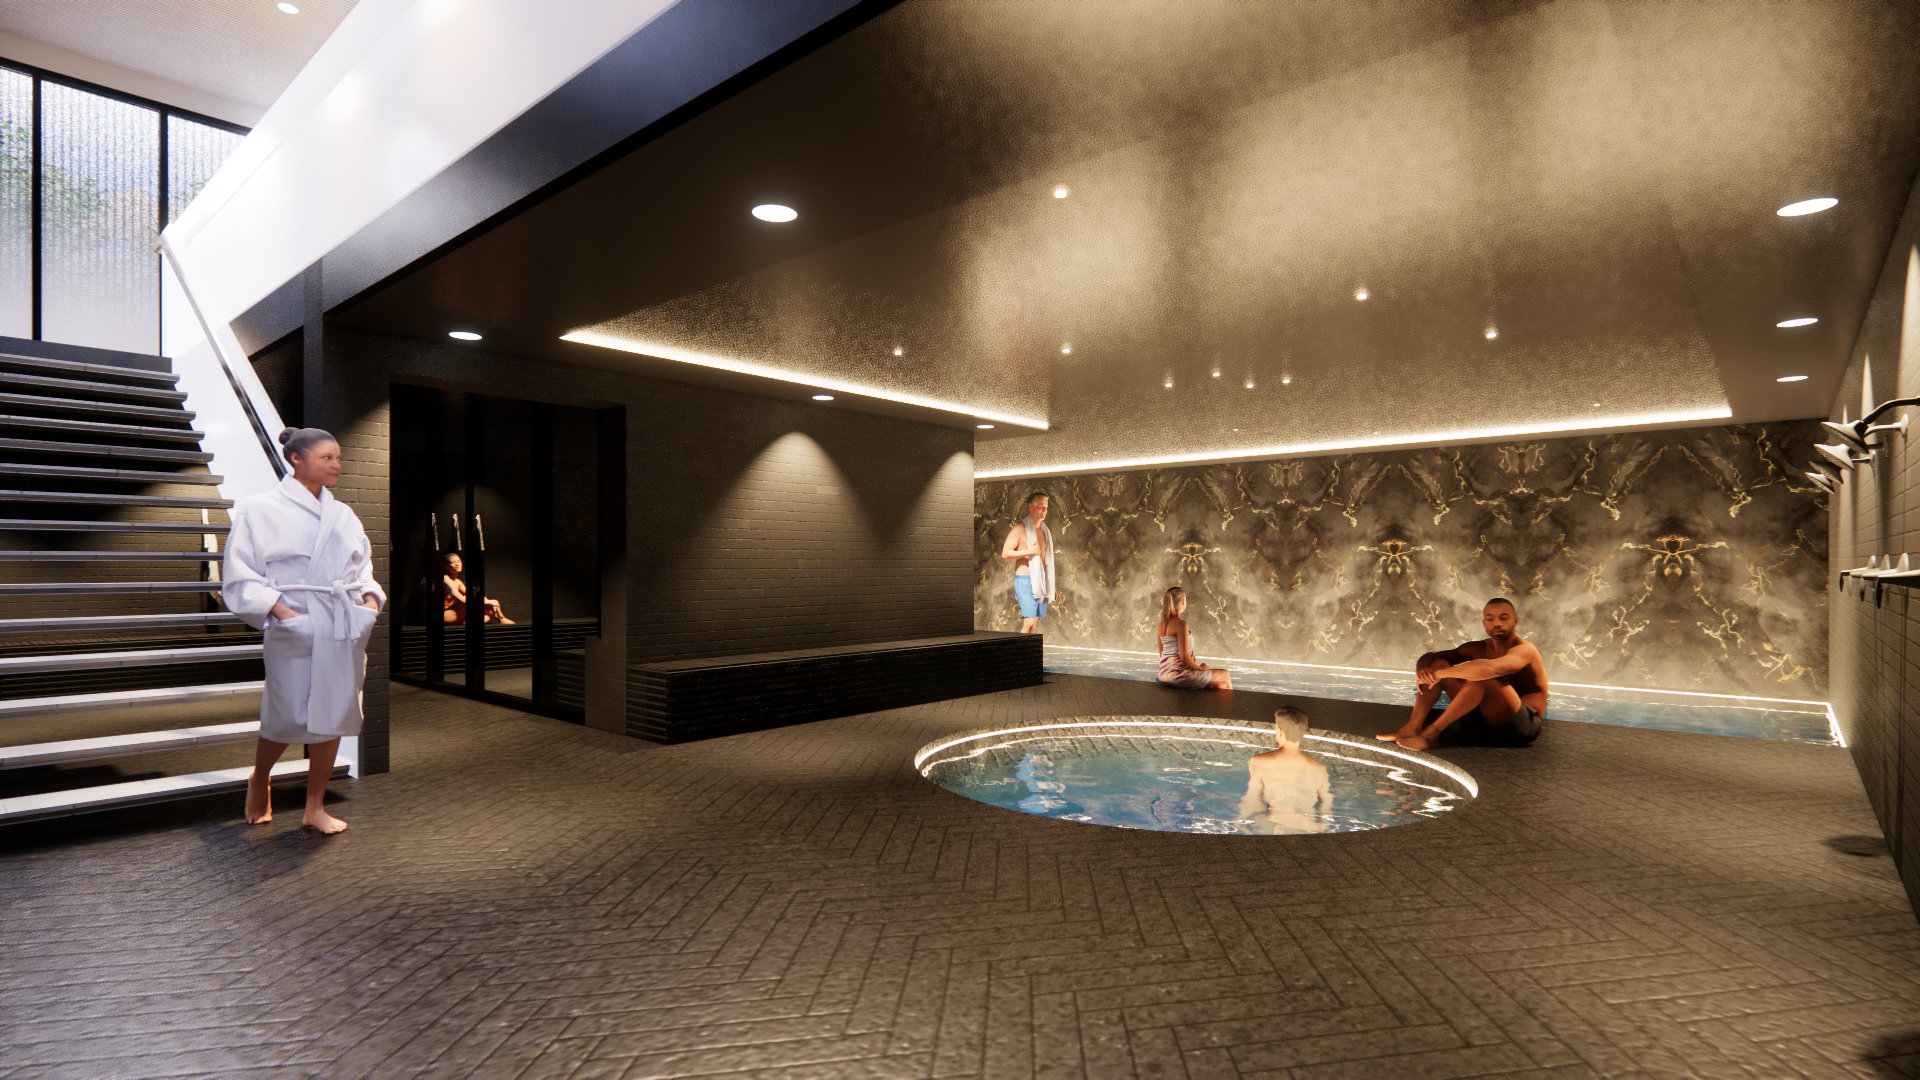 Creating an Indoor Luxury Spa Room at Home